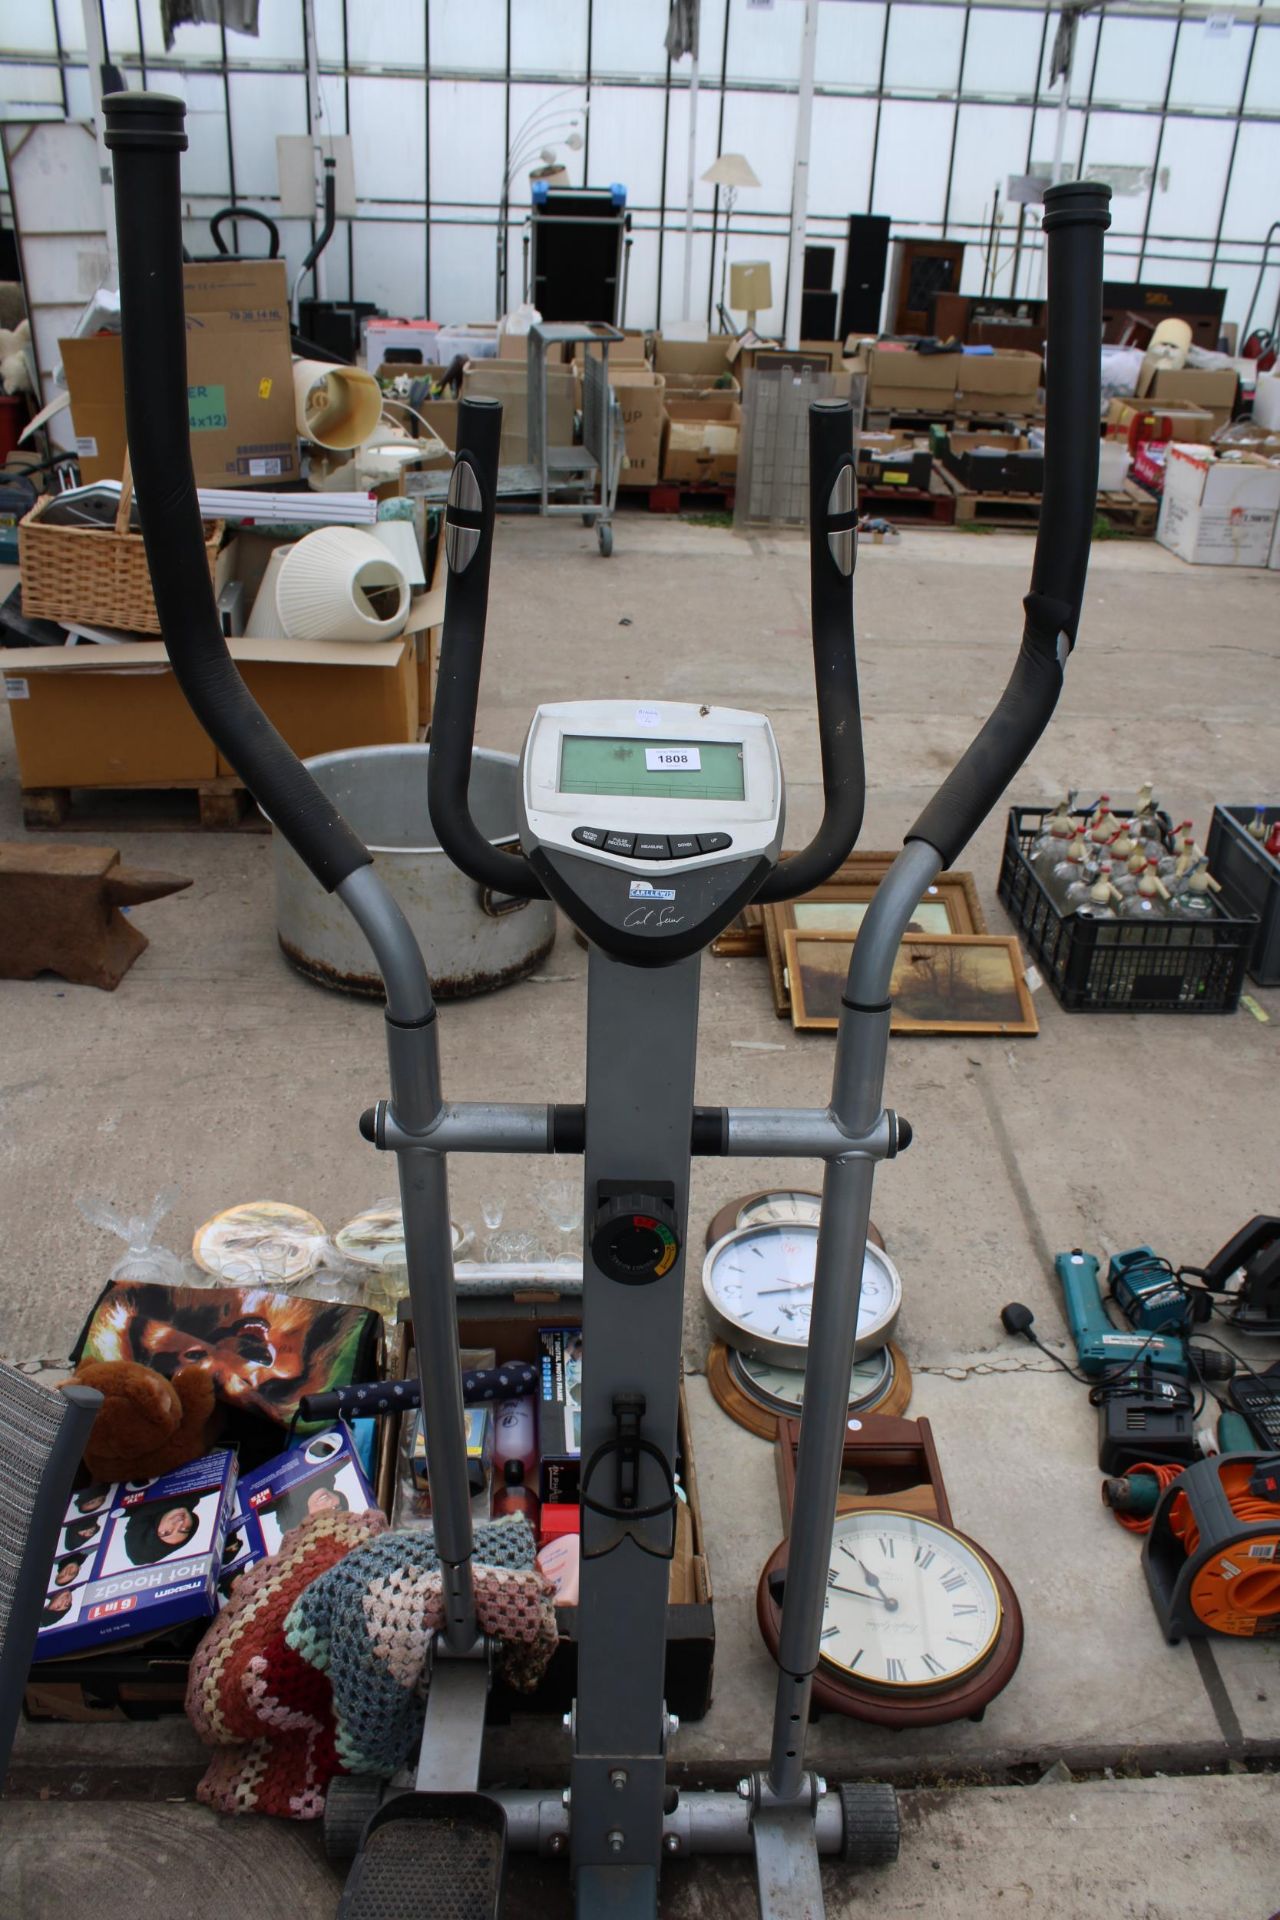 A CARL LEWIS CROSS TRAINER EXERCISE MACHINE - Image 2 of 3